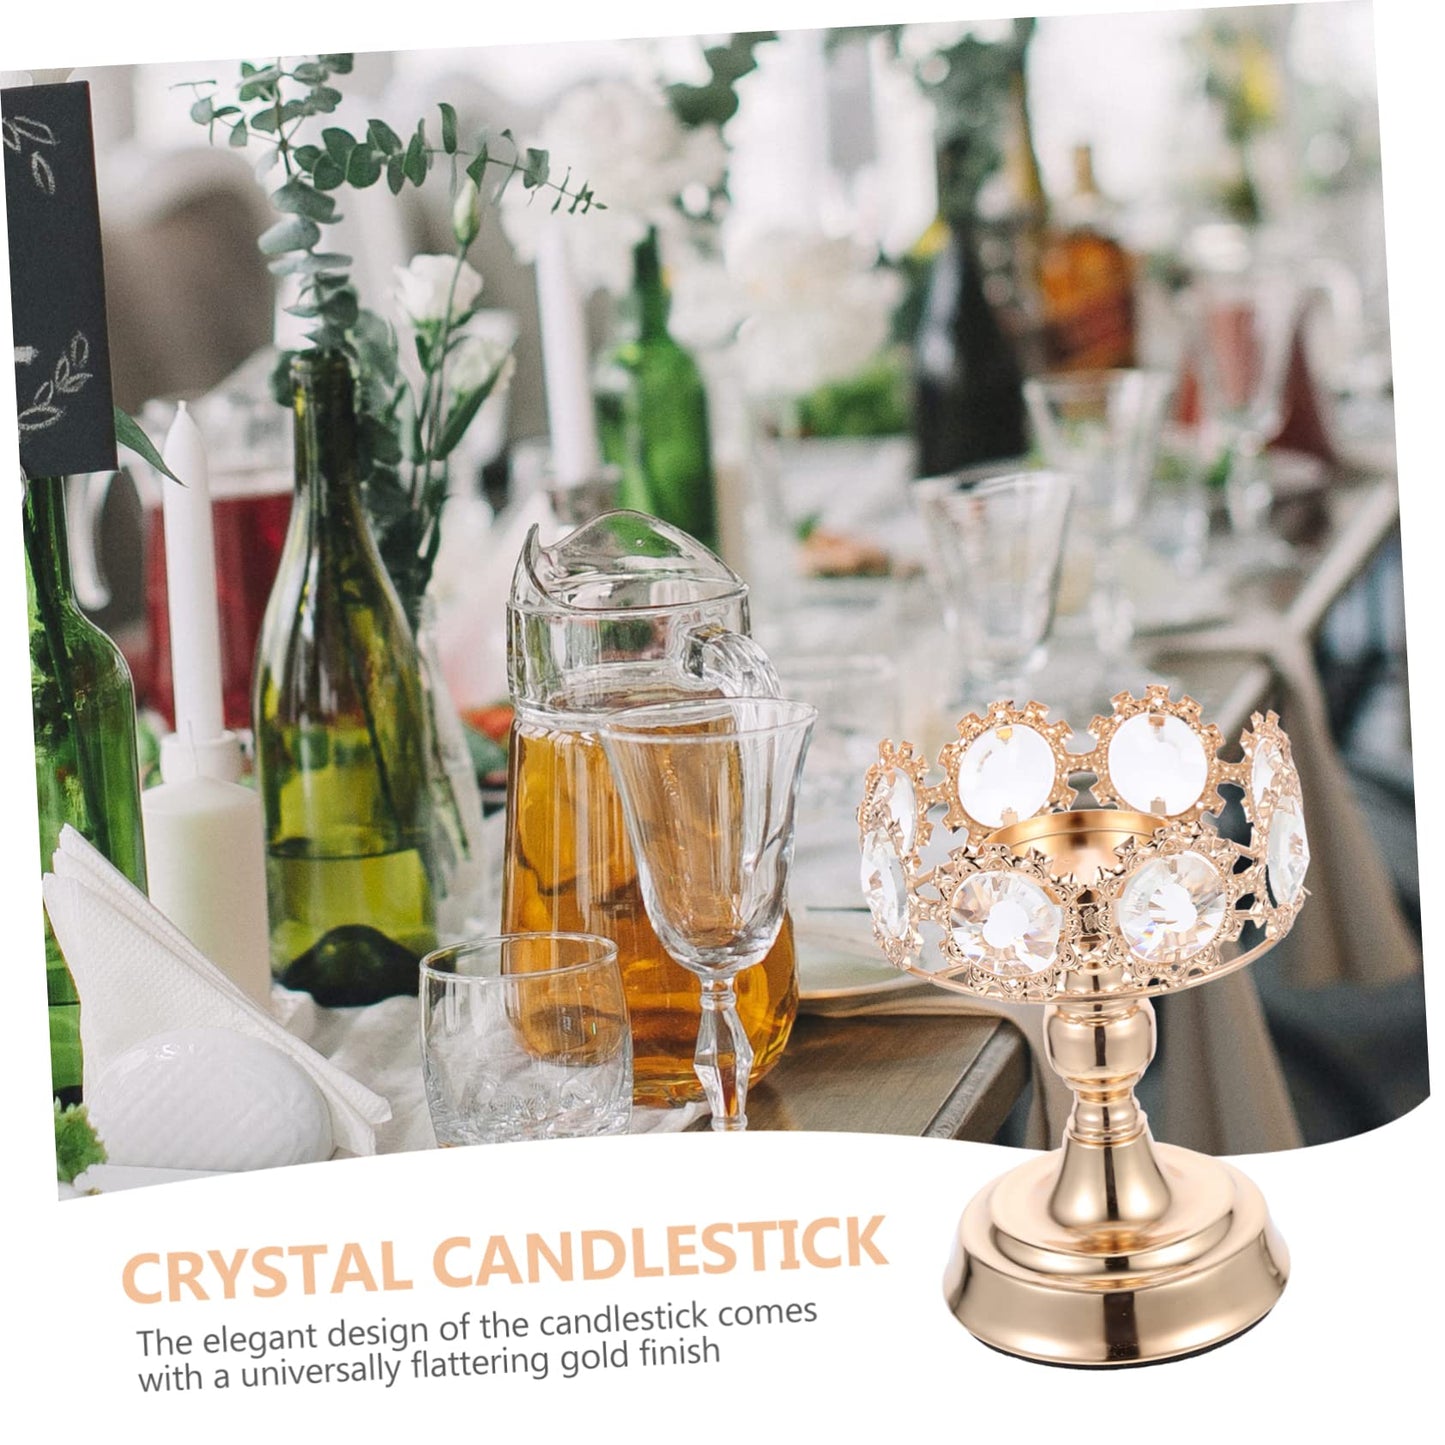 Alipis Crystal Candle Holder Candle Holder Centerpiece Candle Holder Rhinestone Metal Candle Gold Candlestick Holder Candle Holder Crystal 3 Wick Candle Holder Crafts Iron Banquet Fashion